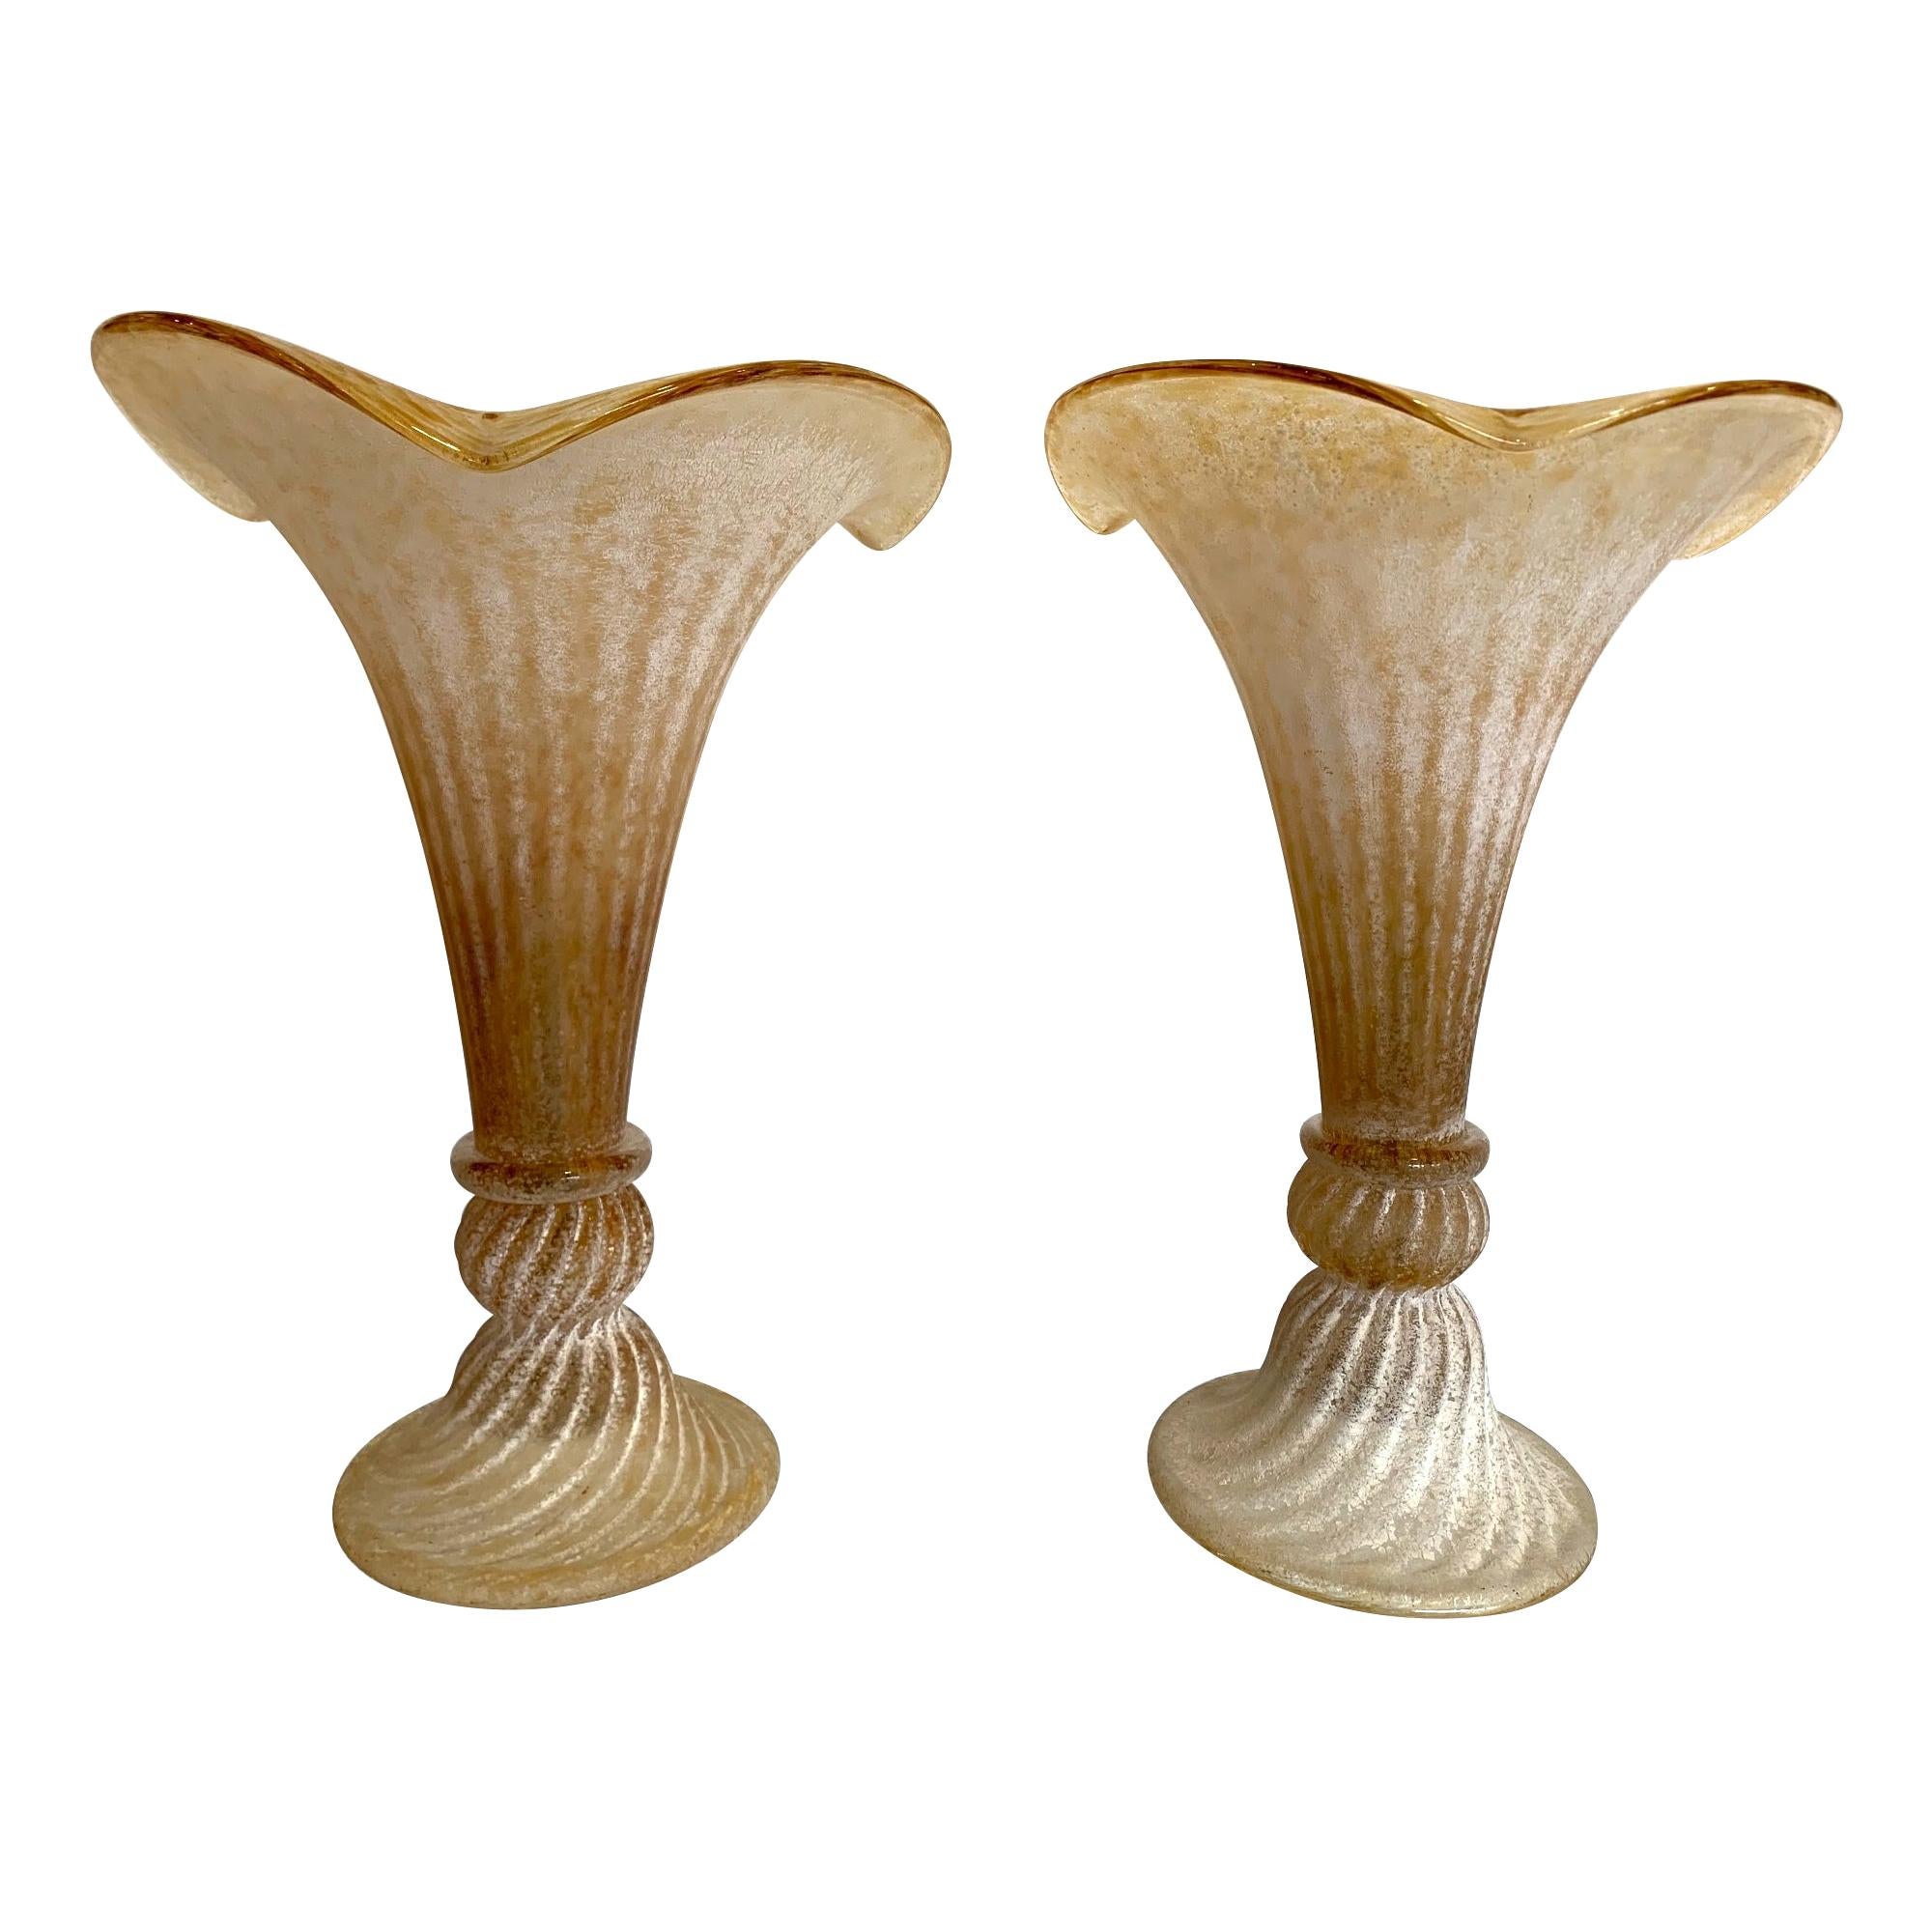 Lovely Pair of Fluted Murano Glass Lamps with Mottled, Ribbed Finish